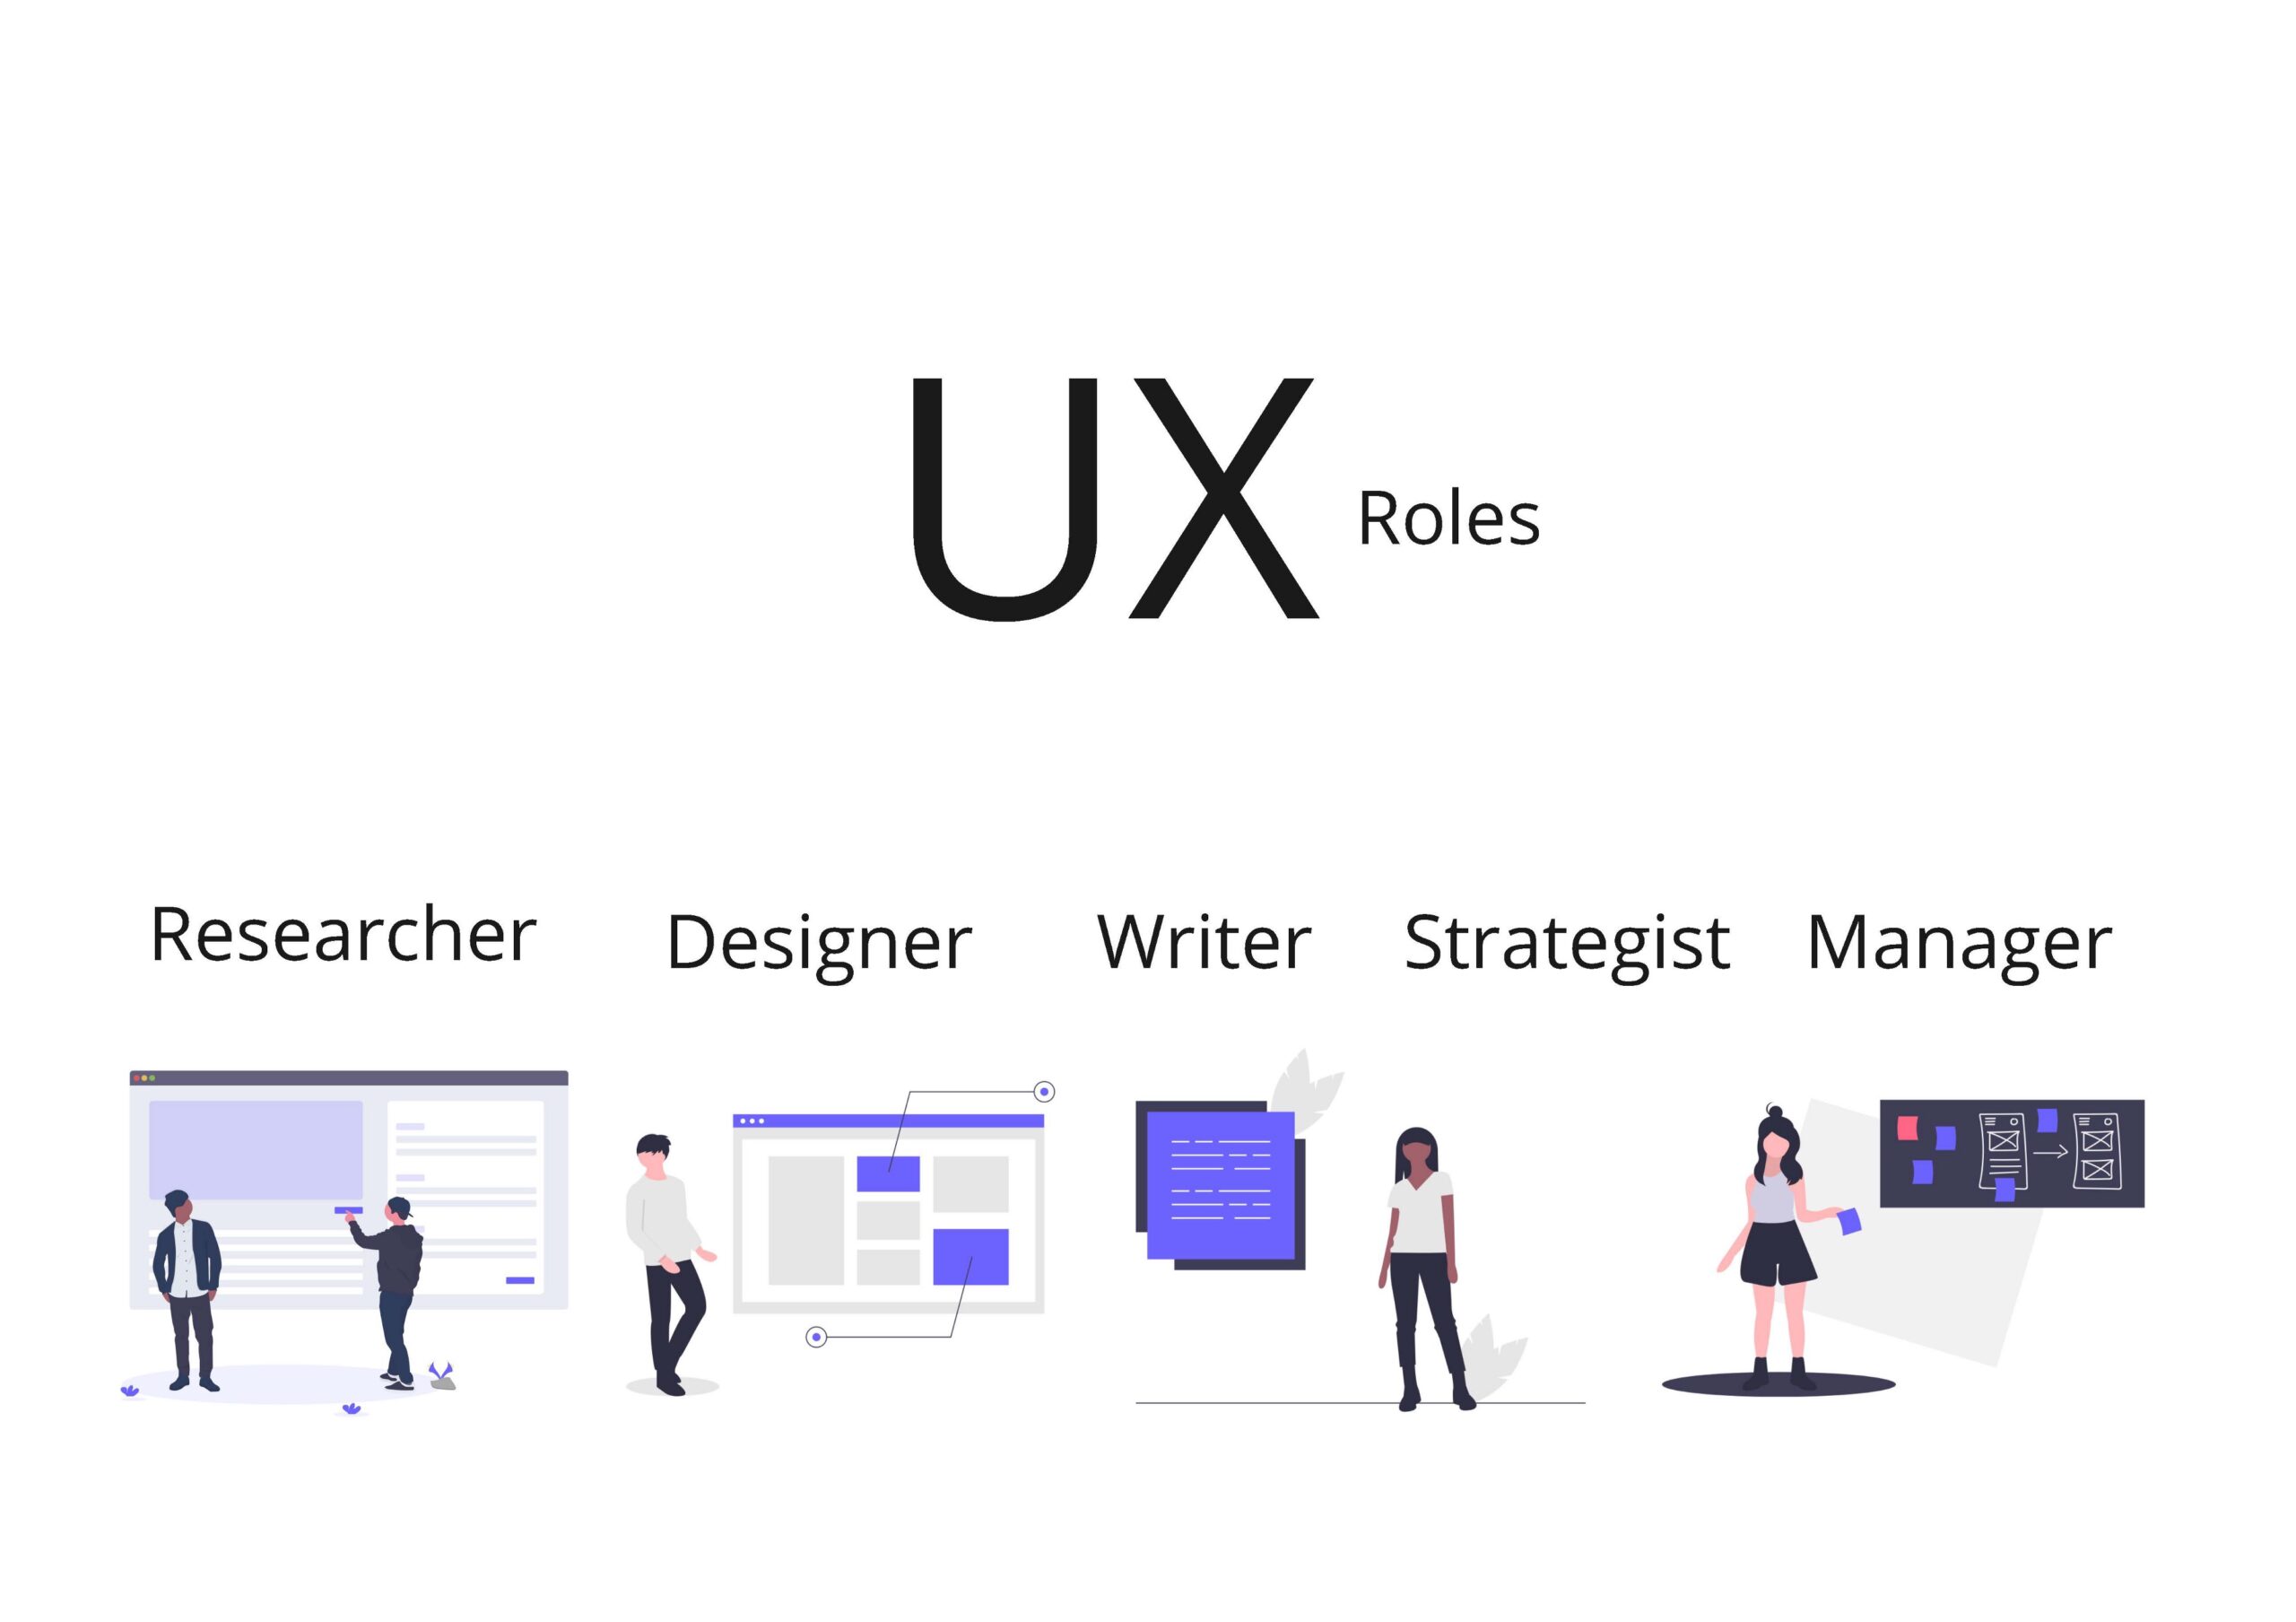 A deep dive in to UX roles